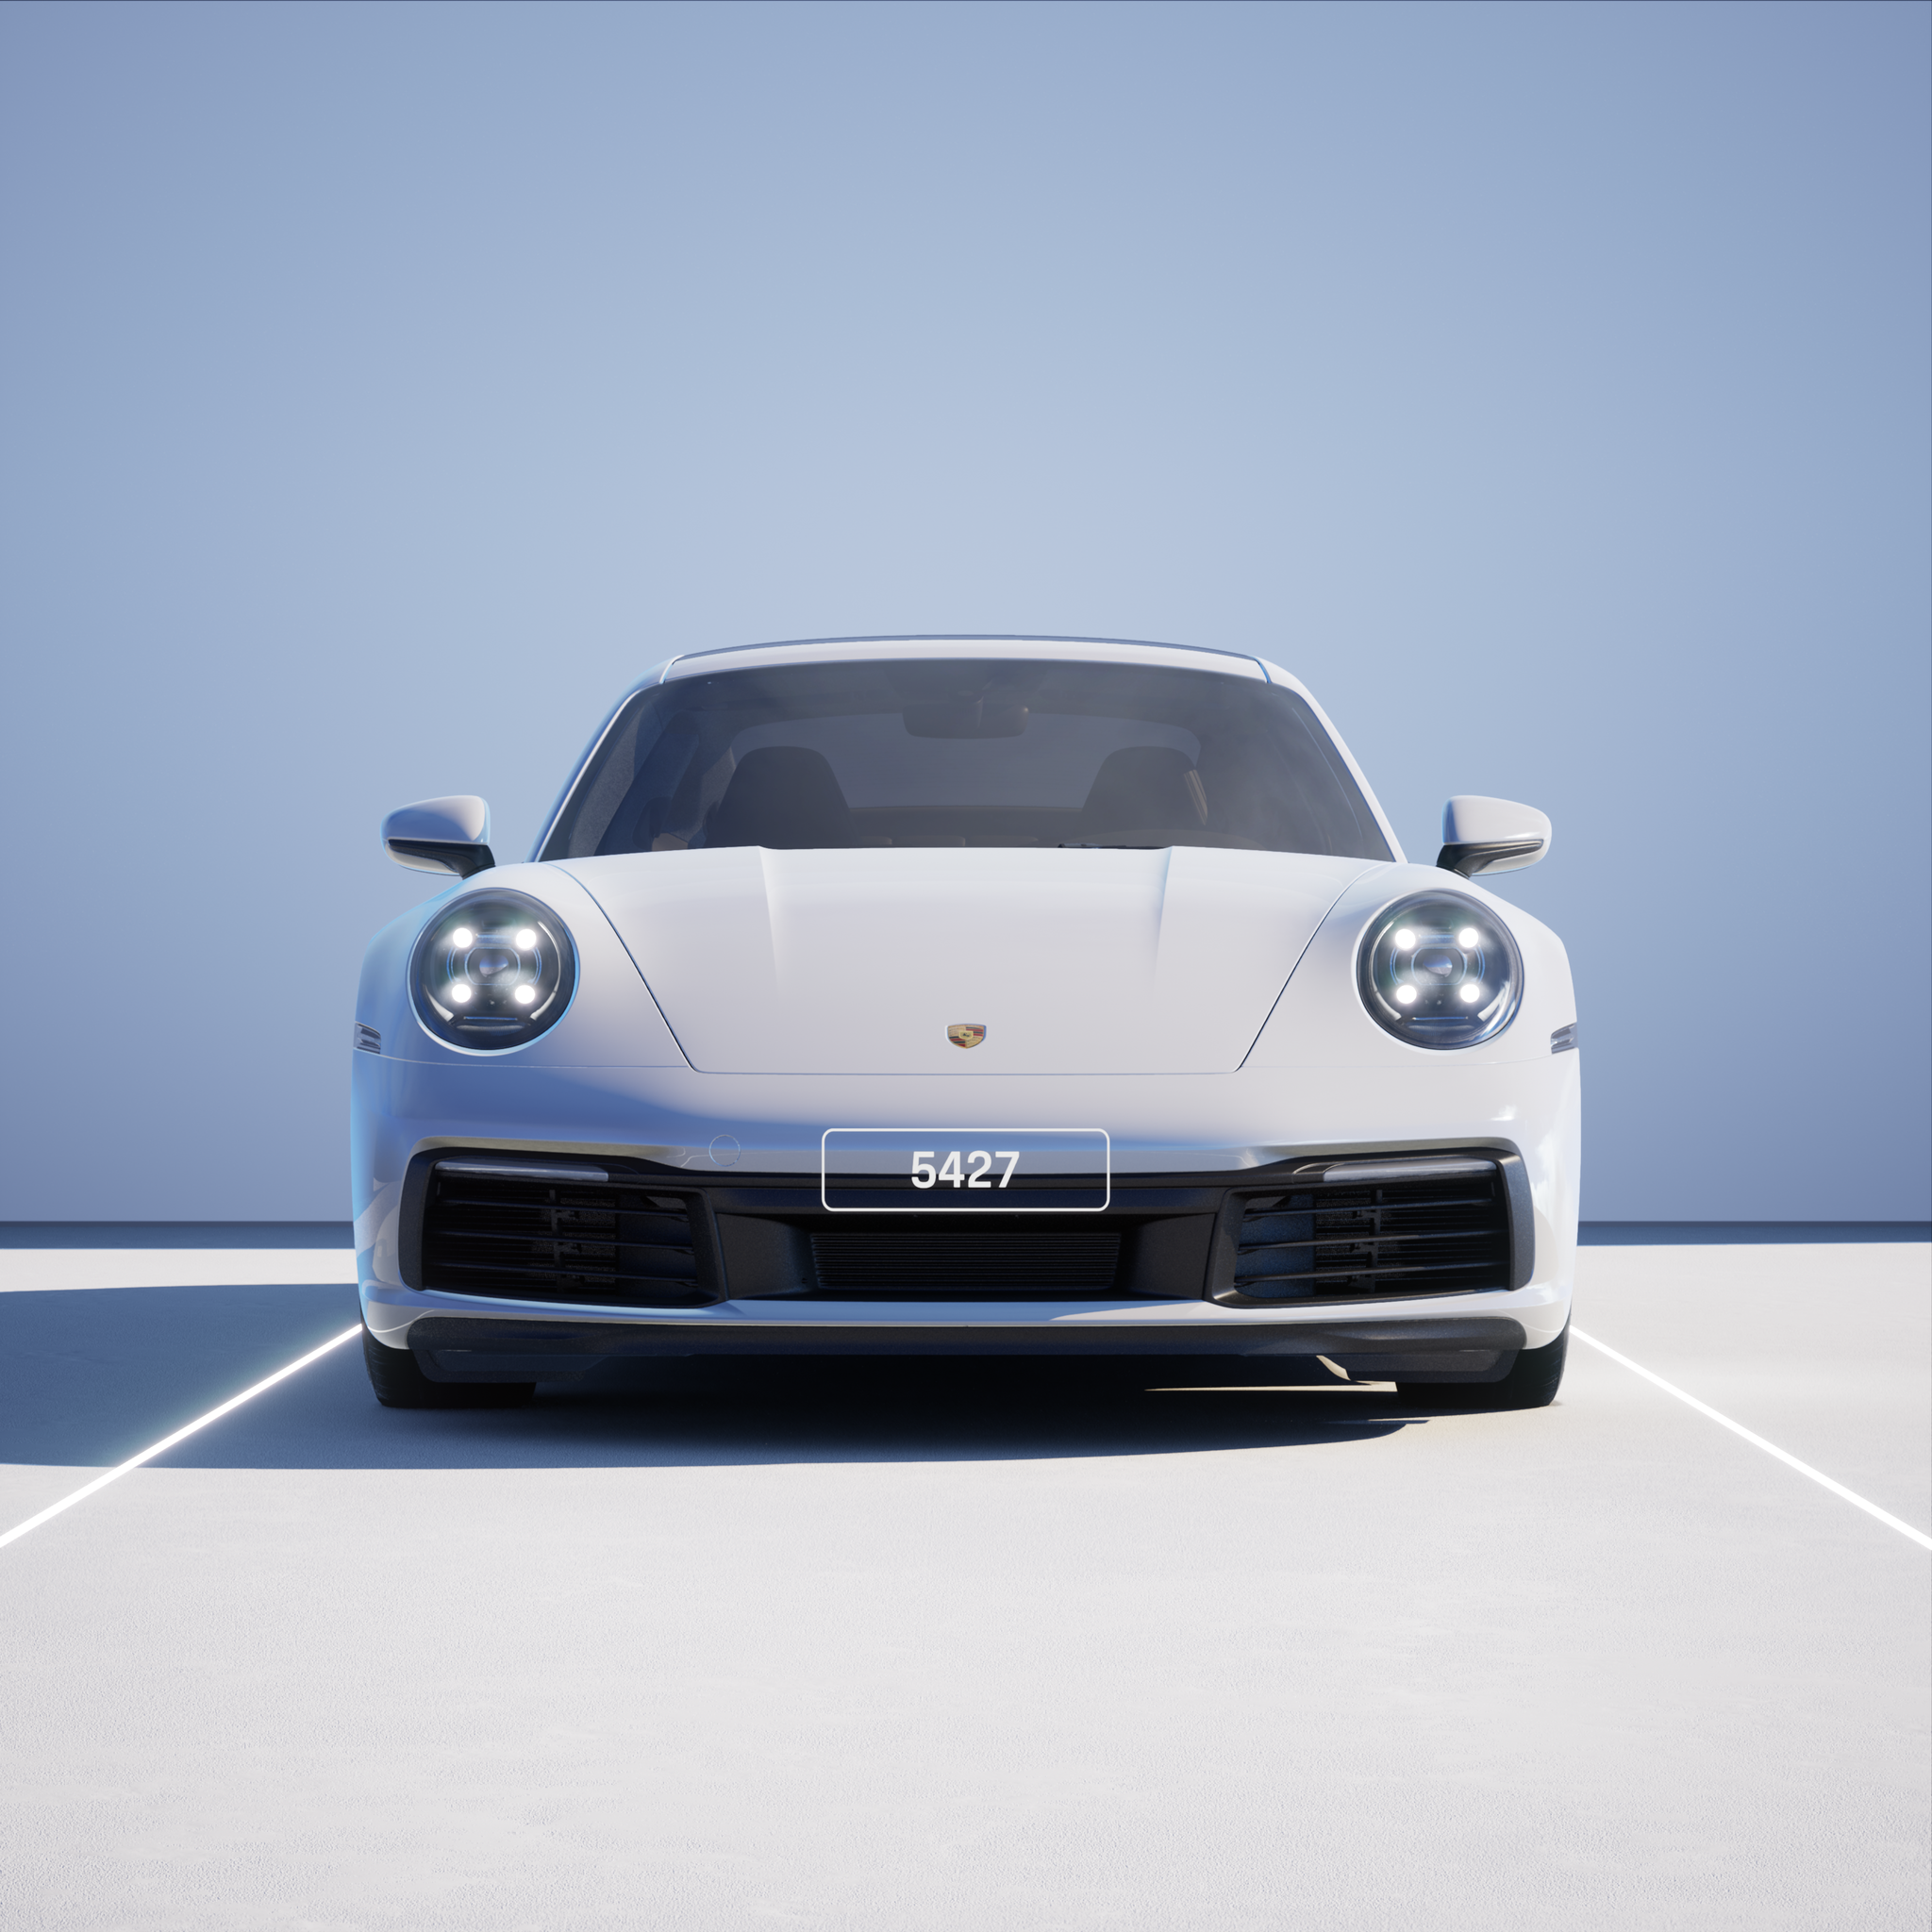 The PORSCHΞ 911 5427 image in phase